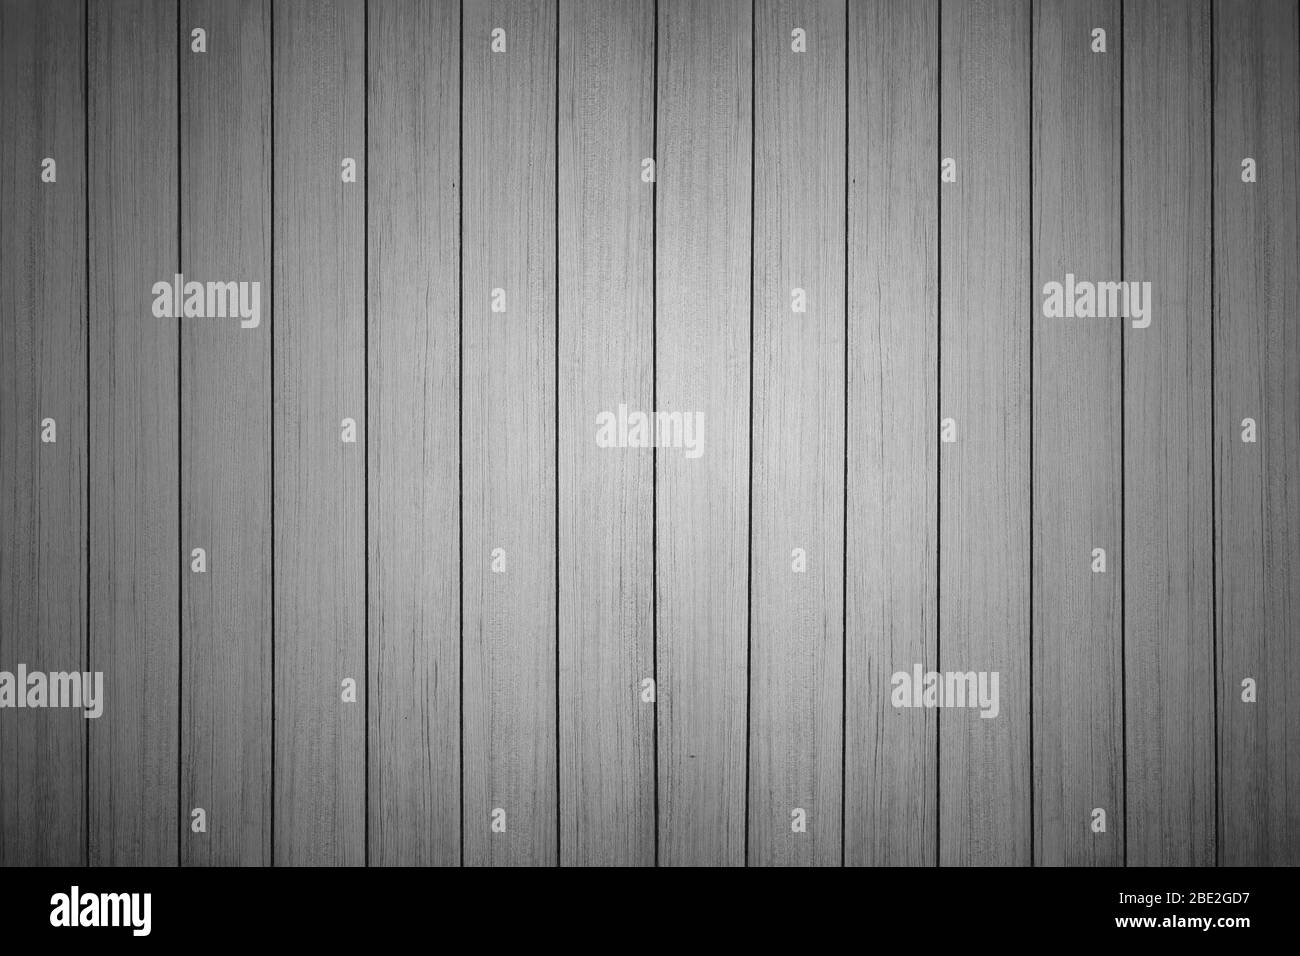 brown wood texture seamless in black and white background Stock Photo